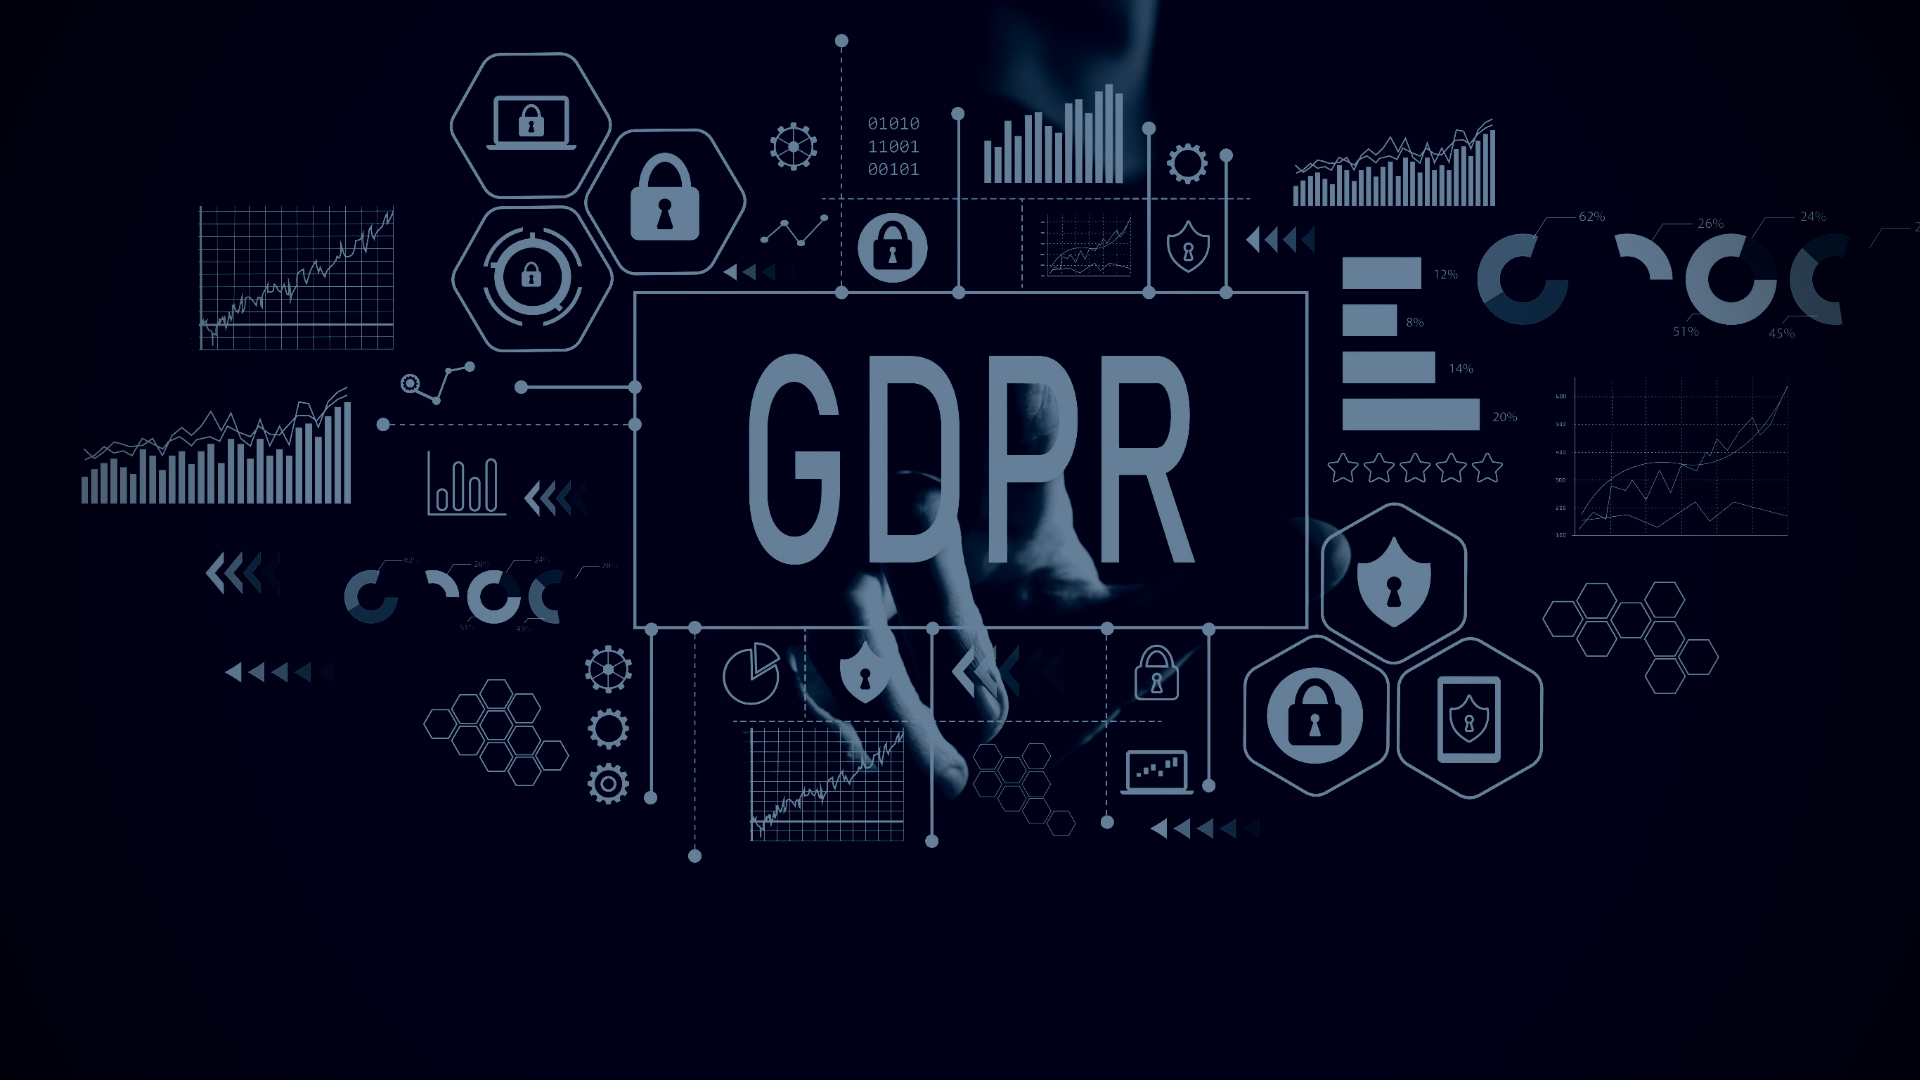 Incident Response: When The General Data Protection Regulation (GDPR) Requires Action